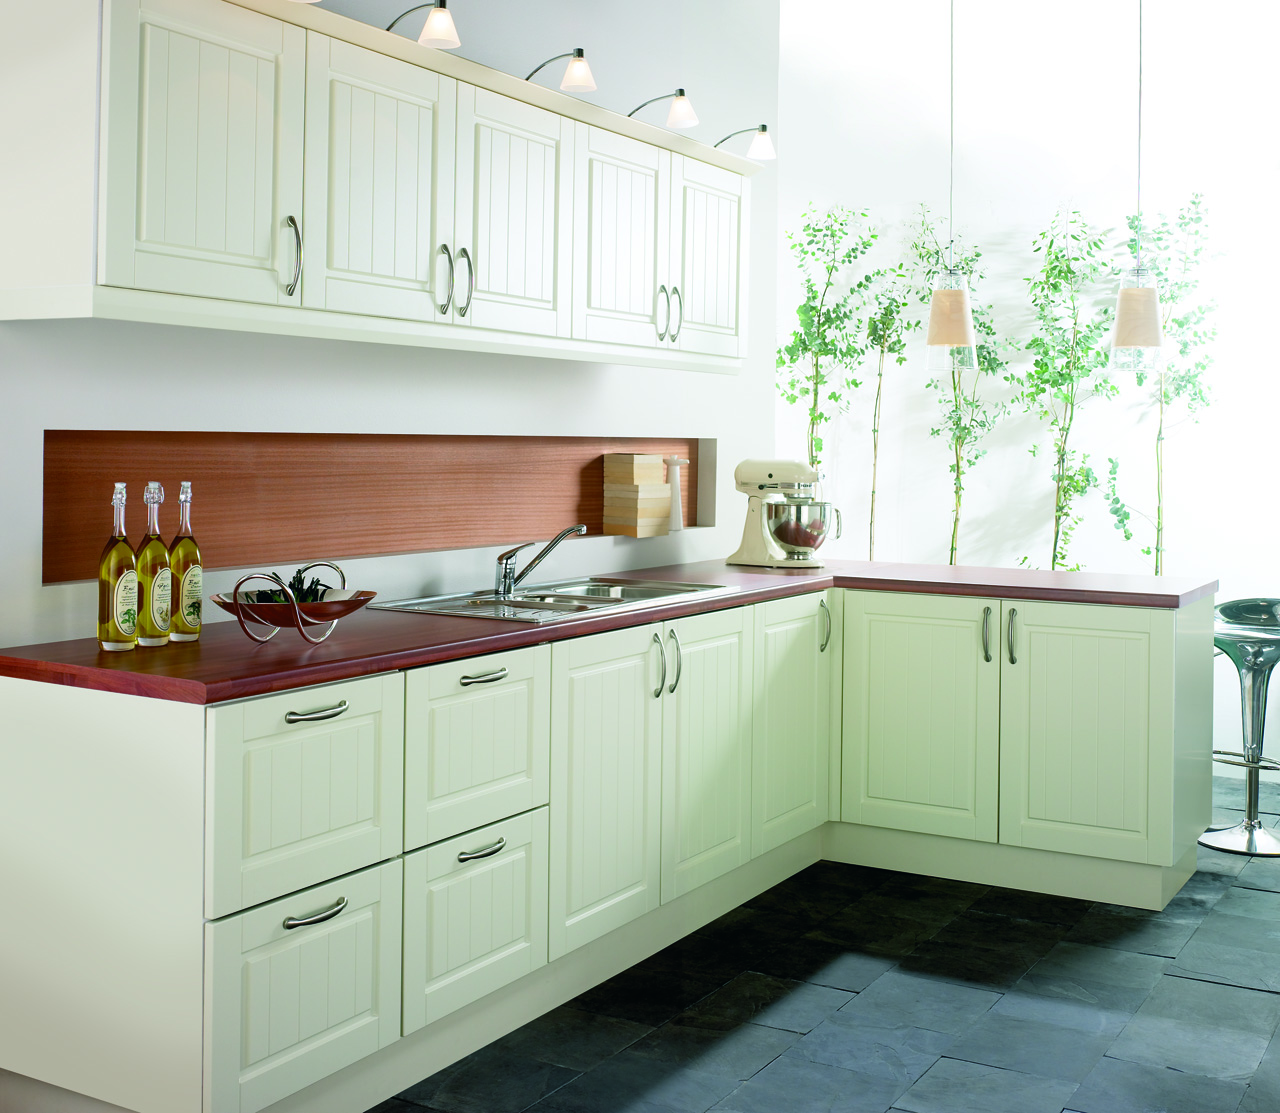 Traditional Kitchens - Kitchen Centre Liverpool